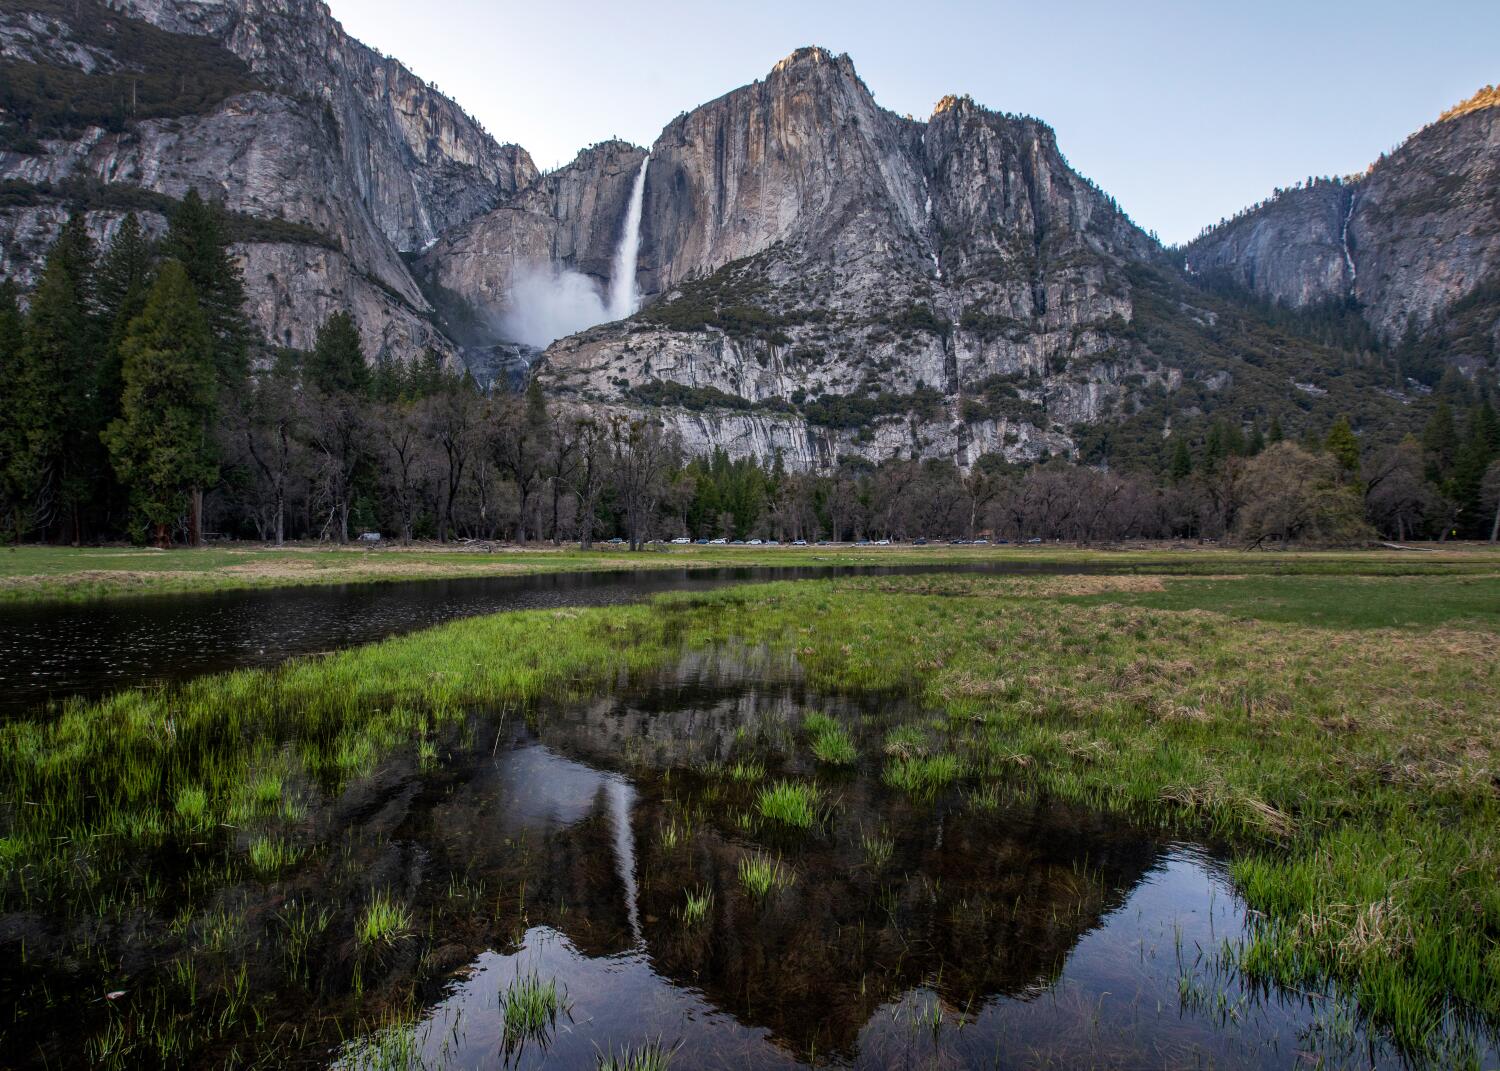 Looming government shutdown worries business owners near Yosemite, other national parks